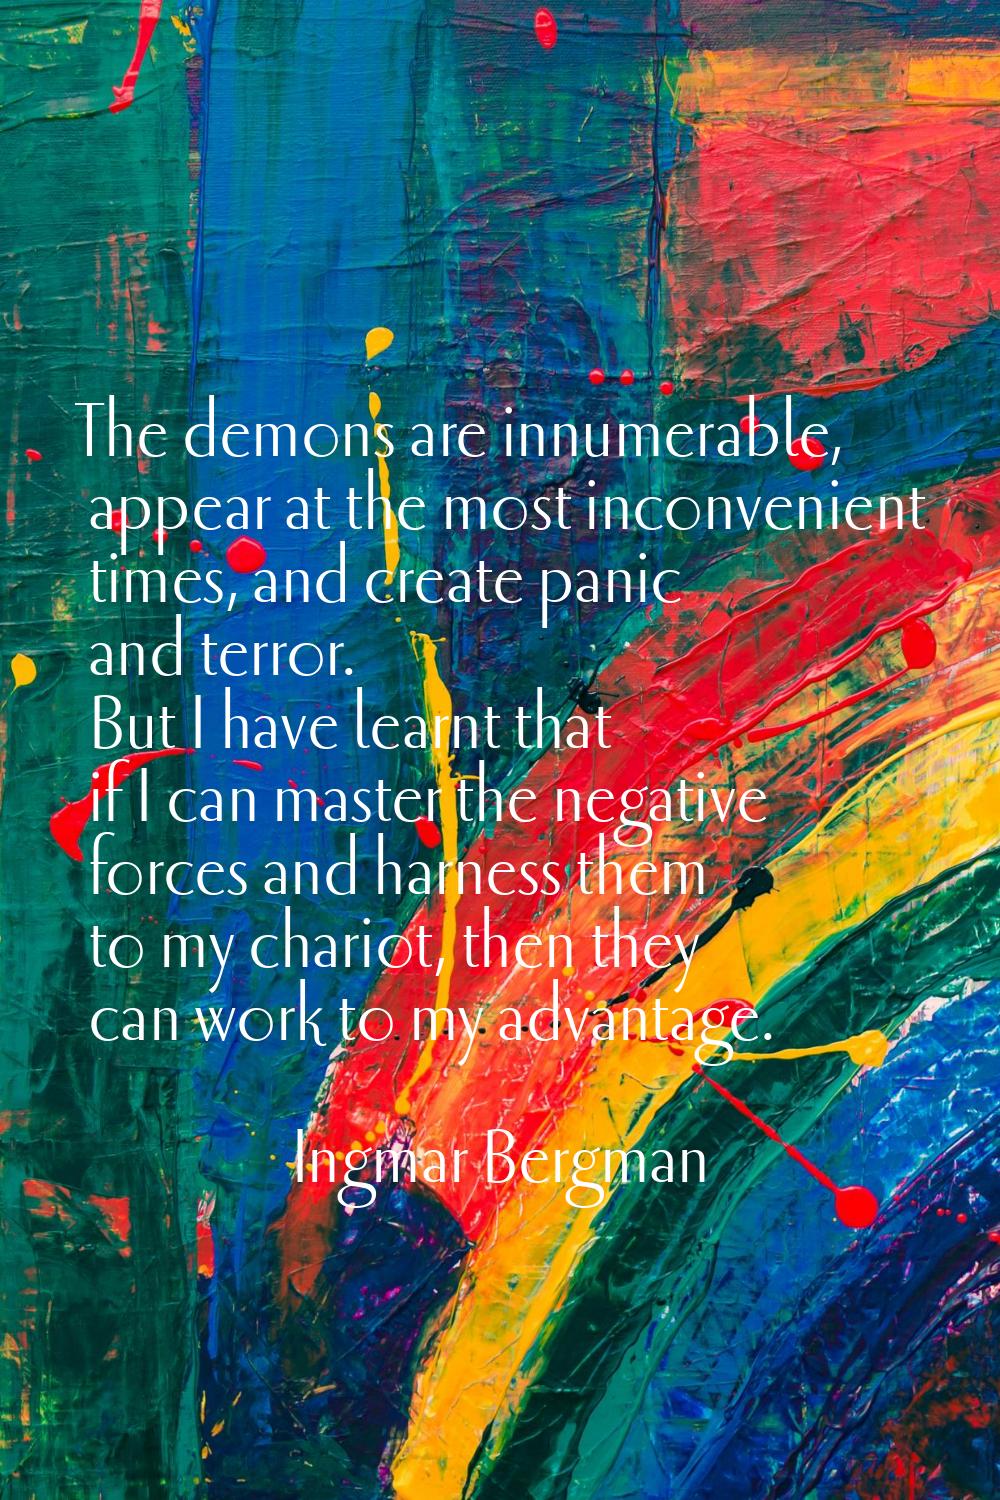 The demons are innumerable, appear at the most inconvenient times, and create panic and terror. But